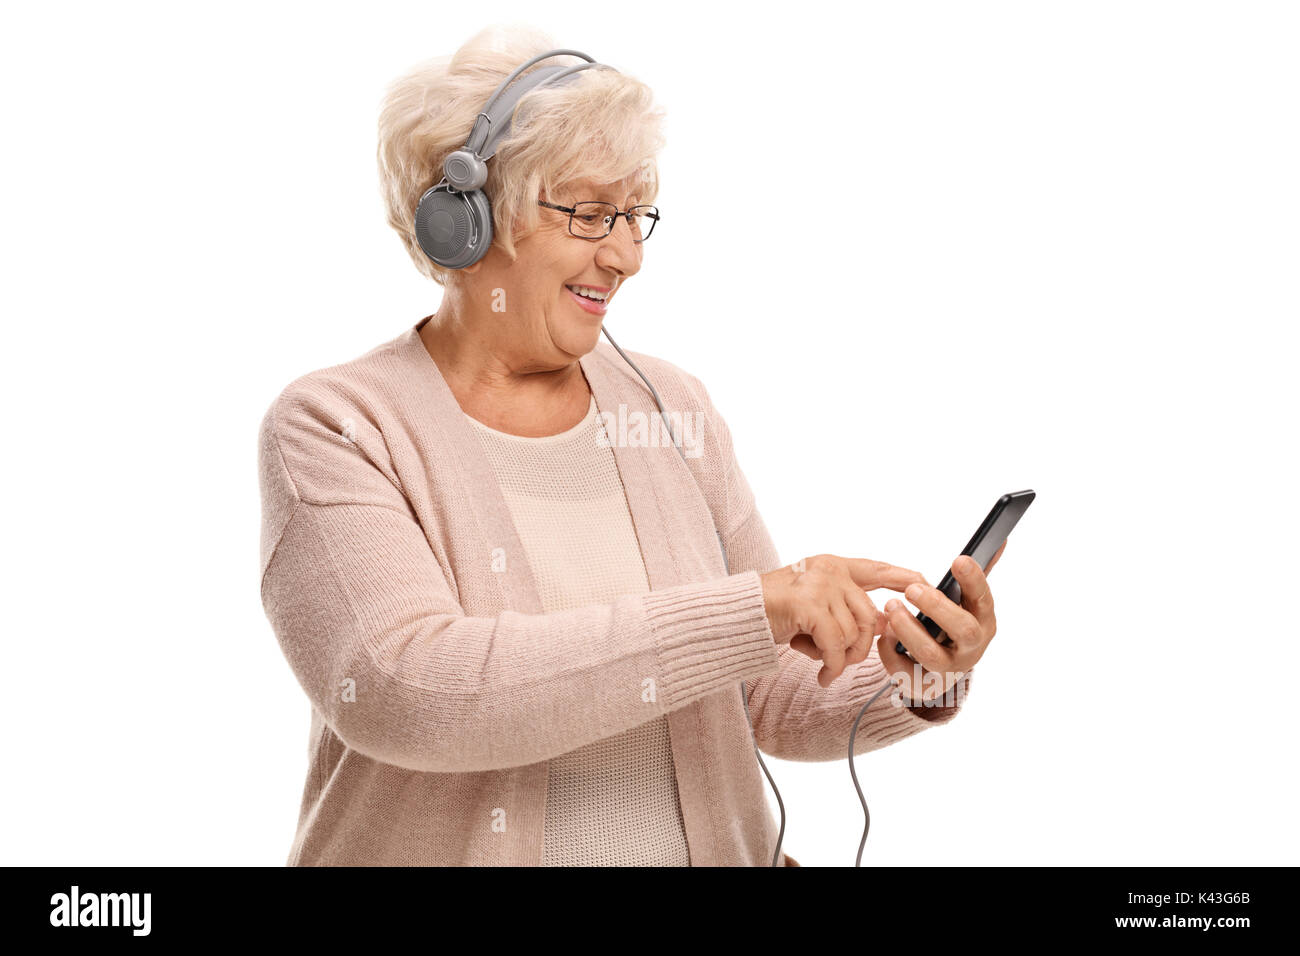 Elderly woman with headphones listening to music on a phone isolated on white background Stock Photo